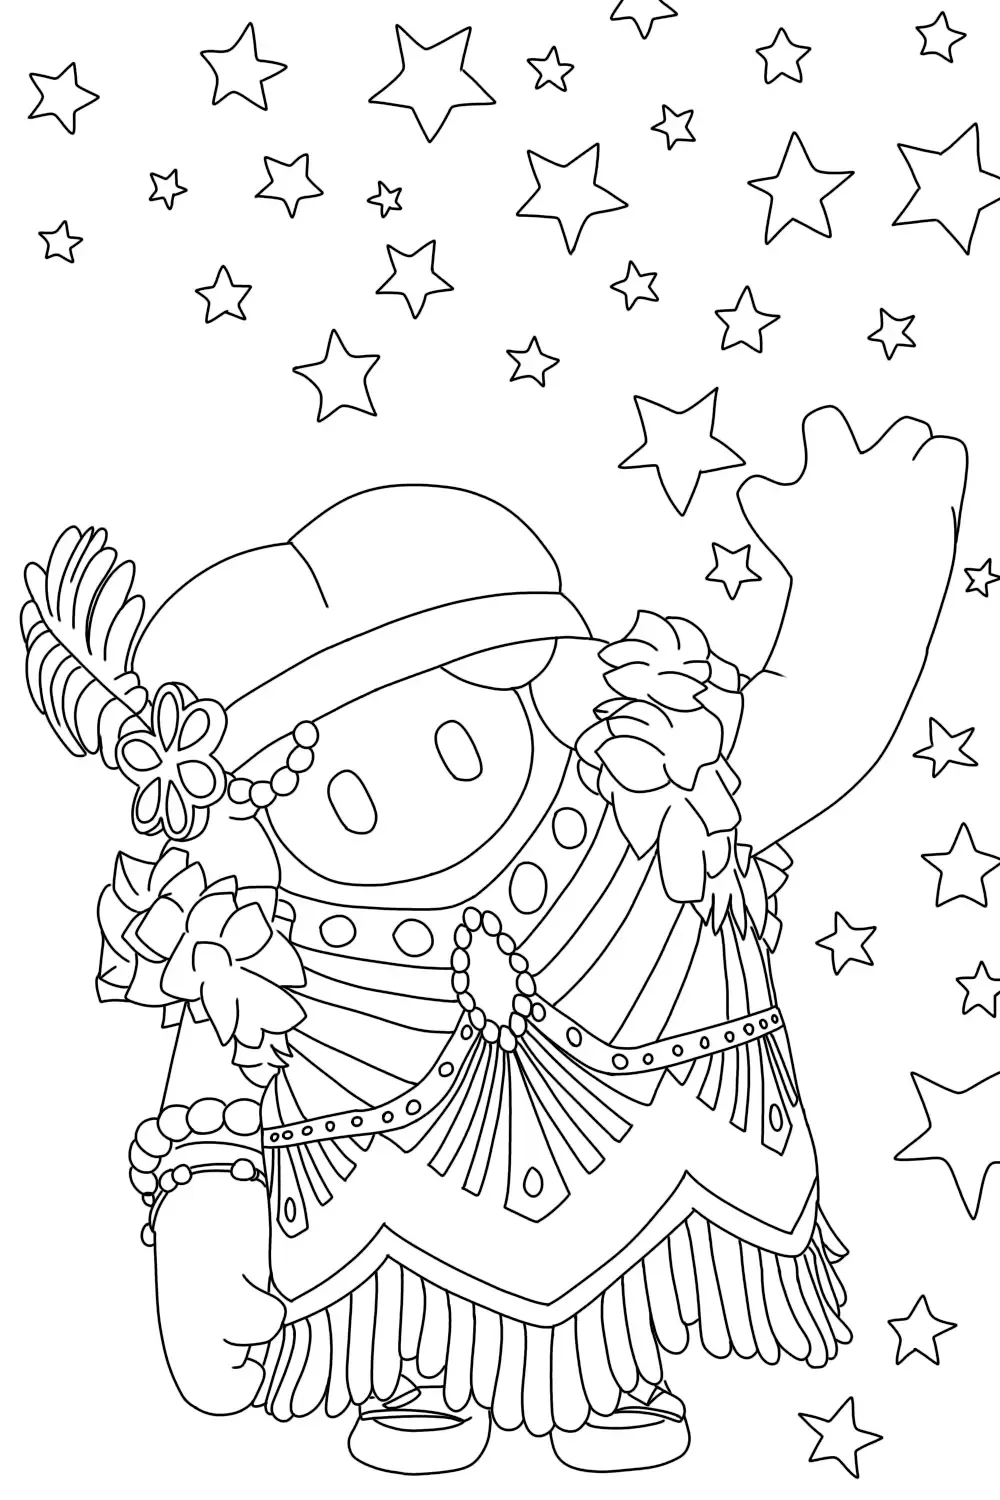 Fall Guys Skin Coloring Pages